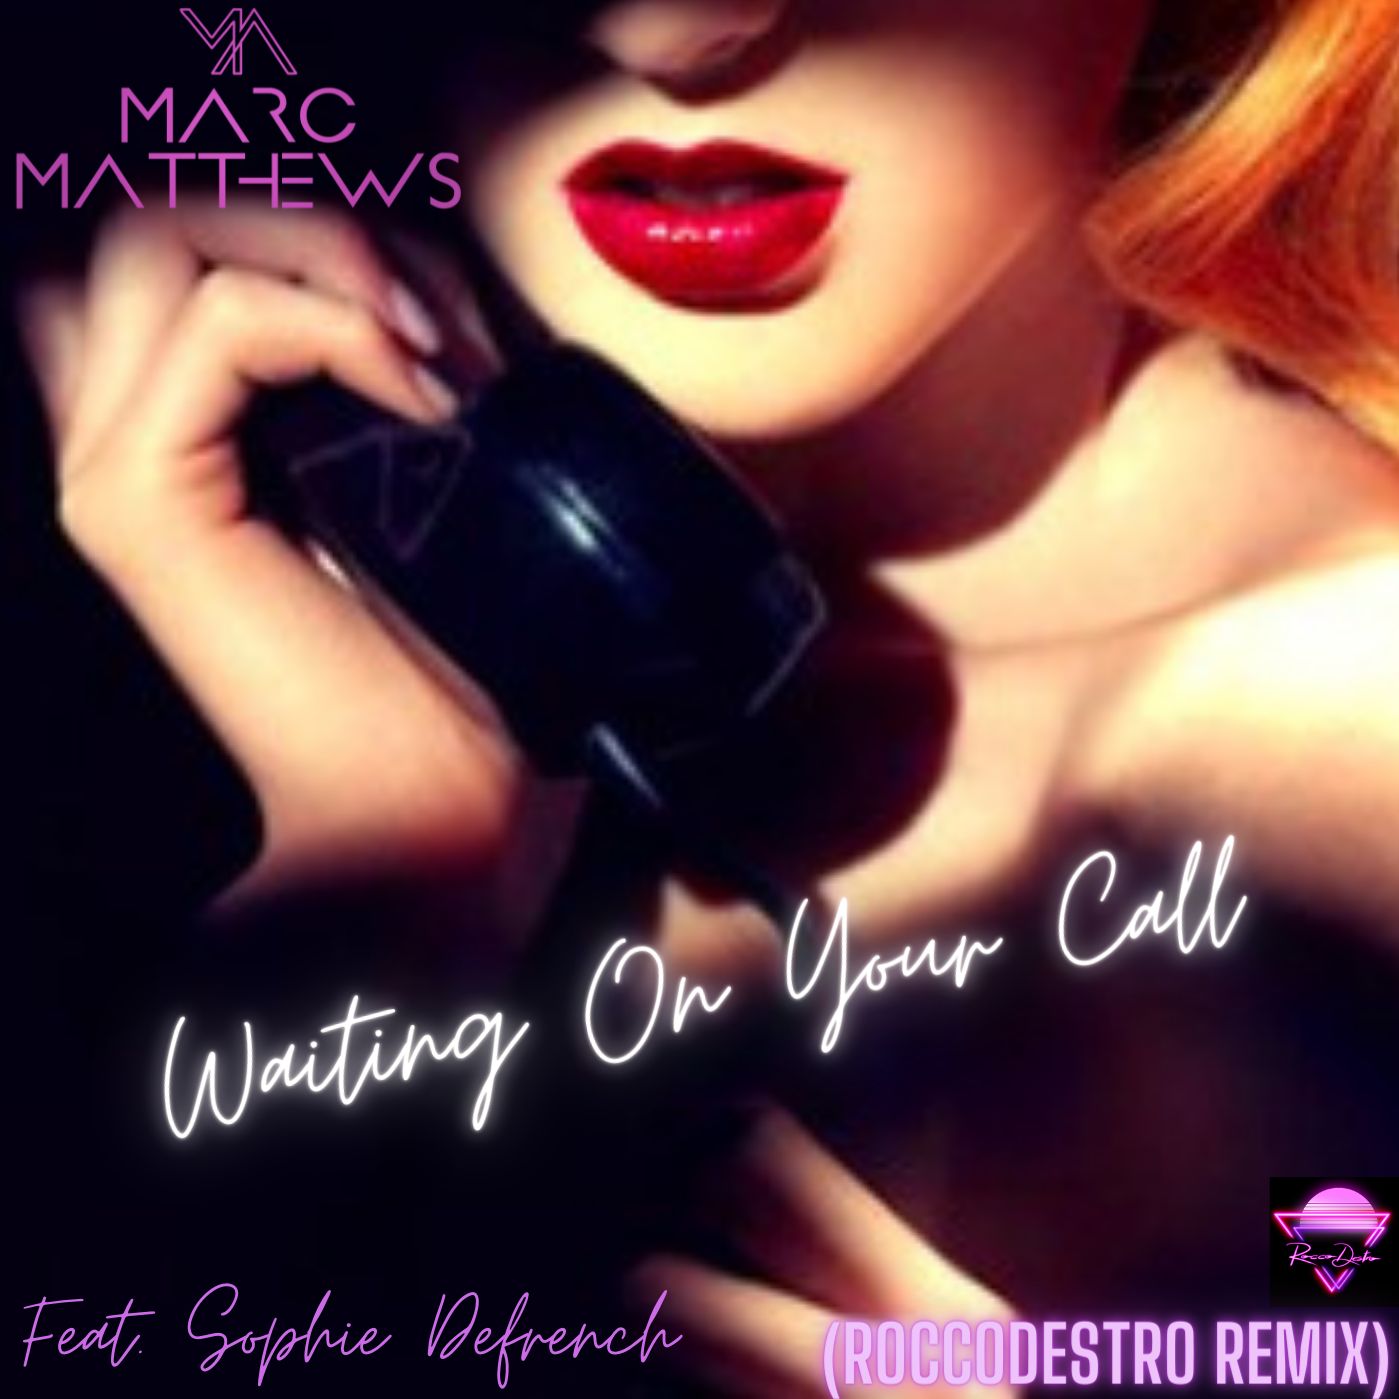 Download Waiting On Your Call (Rocco Destro Remix)